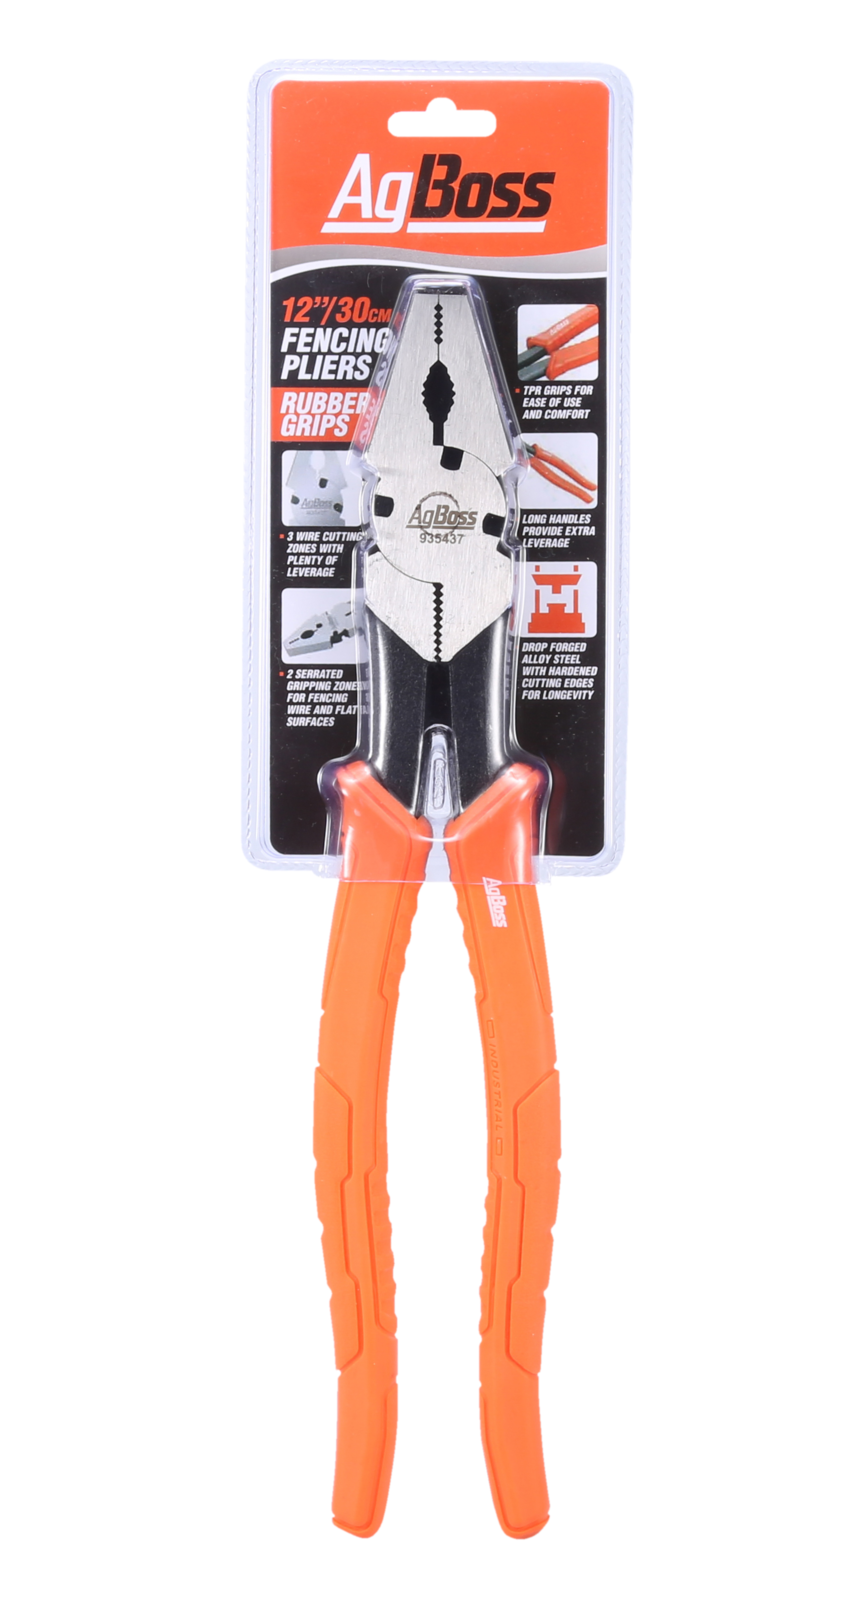 AgBoss Fencing Pliers 300mm/12" - Rubber Grips